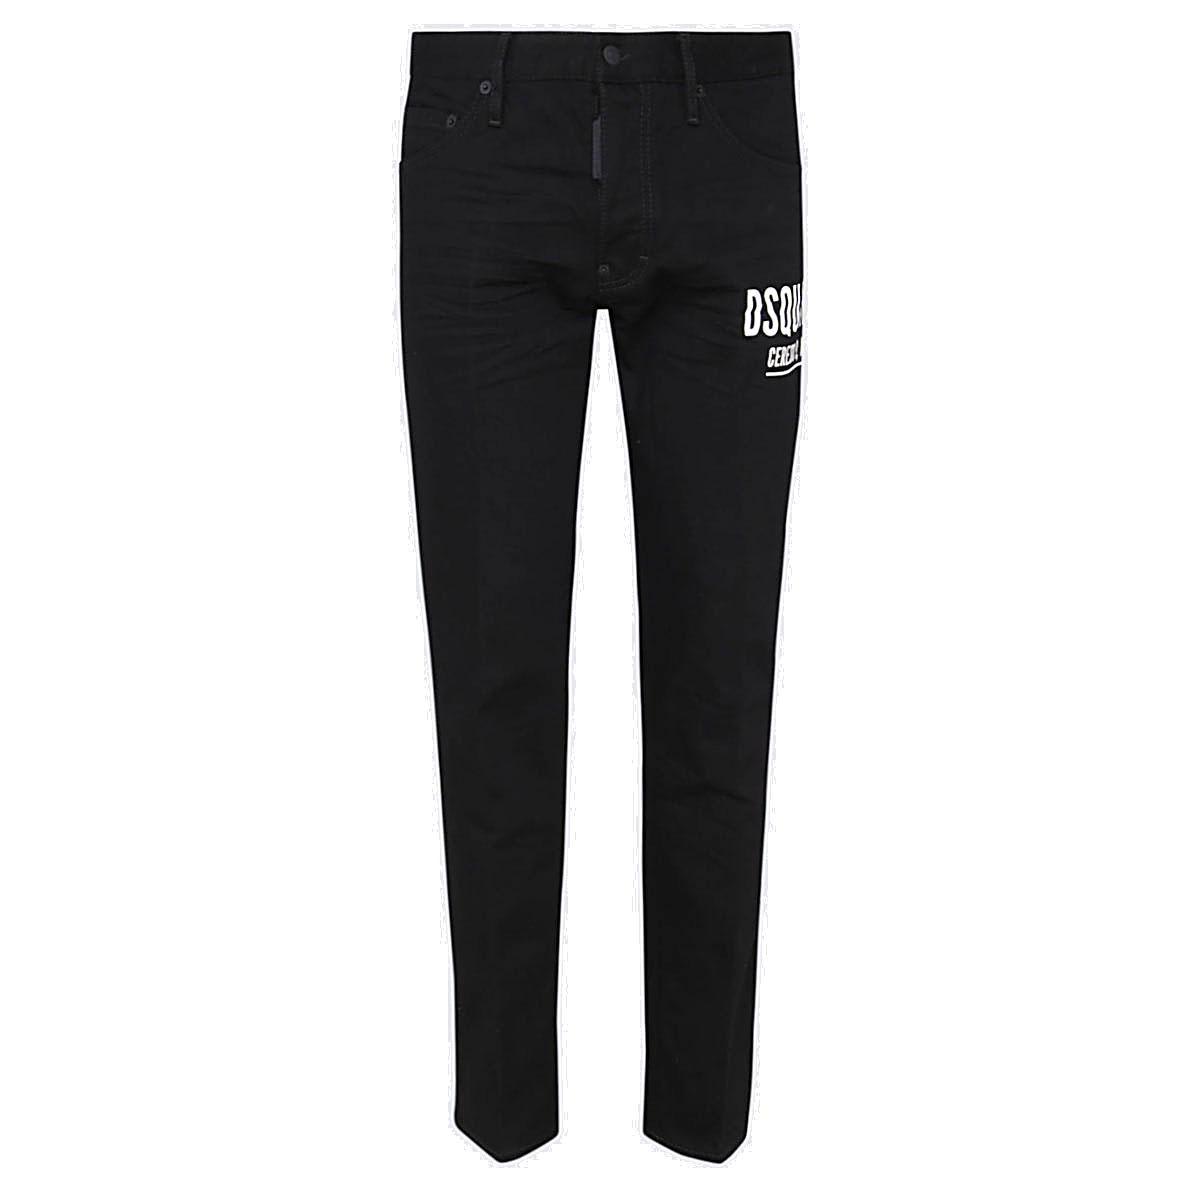 Dsquared2 Logo Printed Mid-rise Jeans